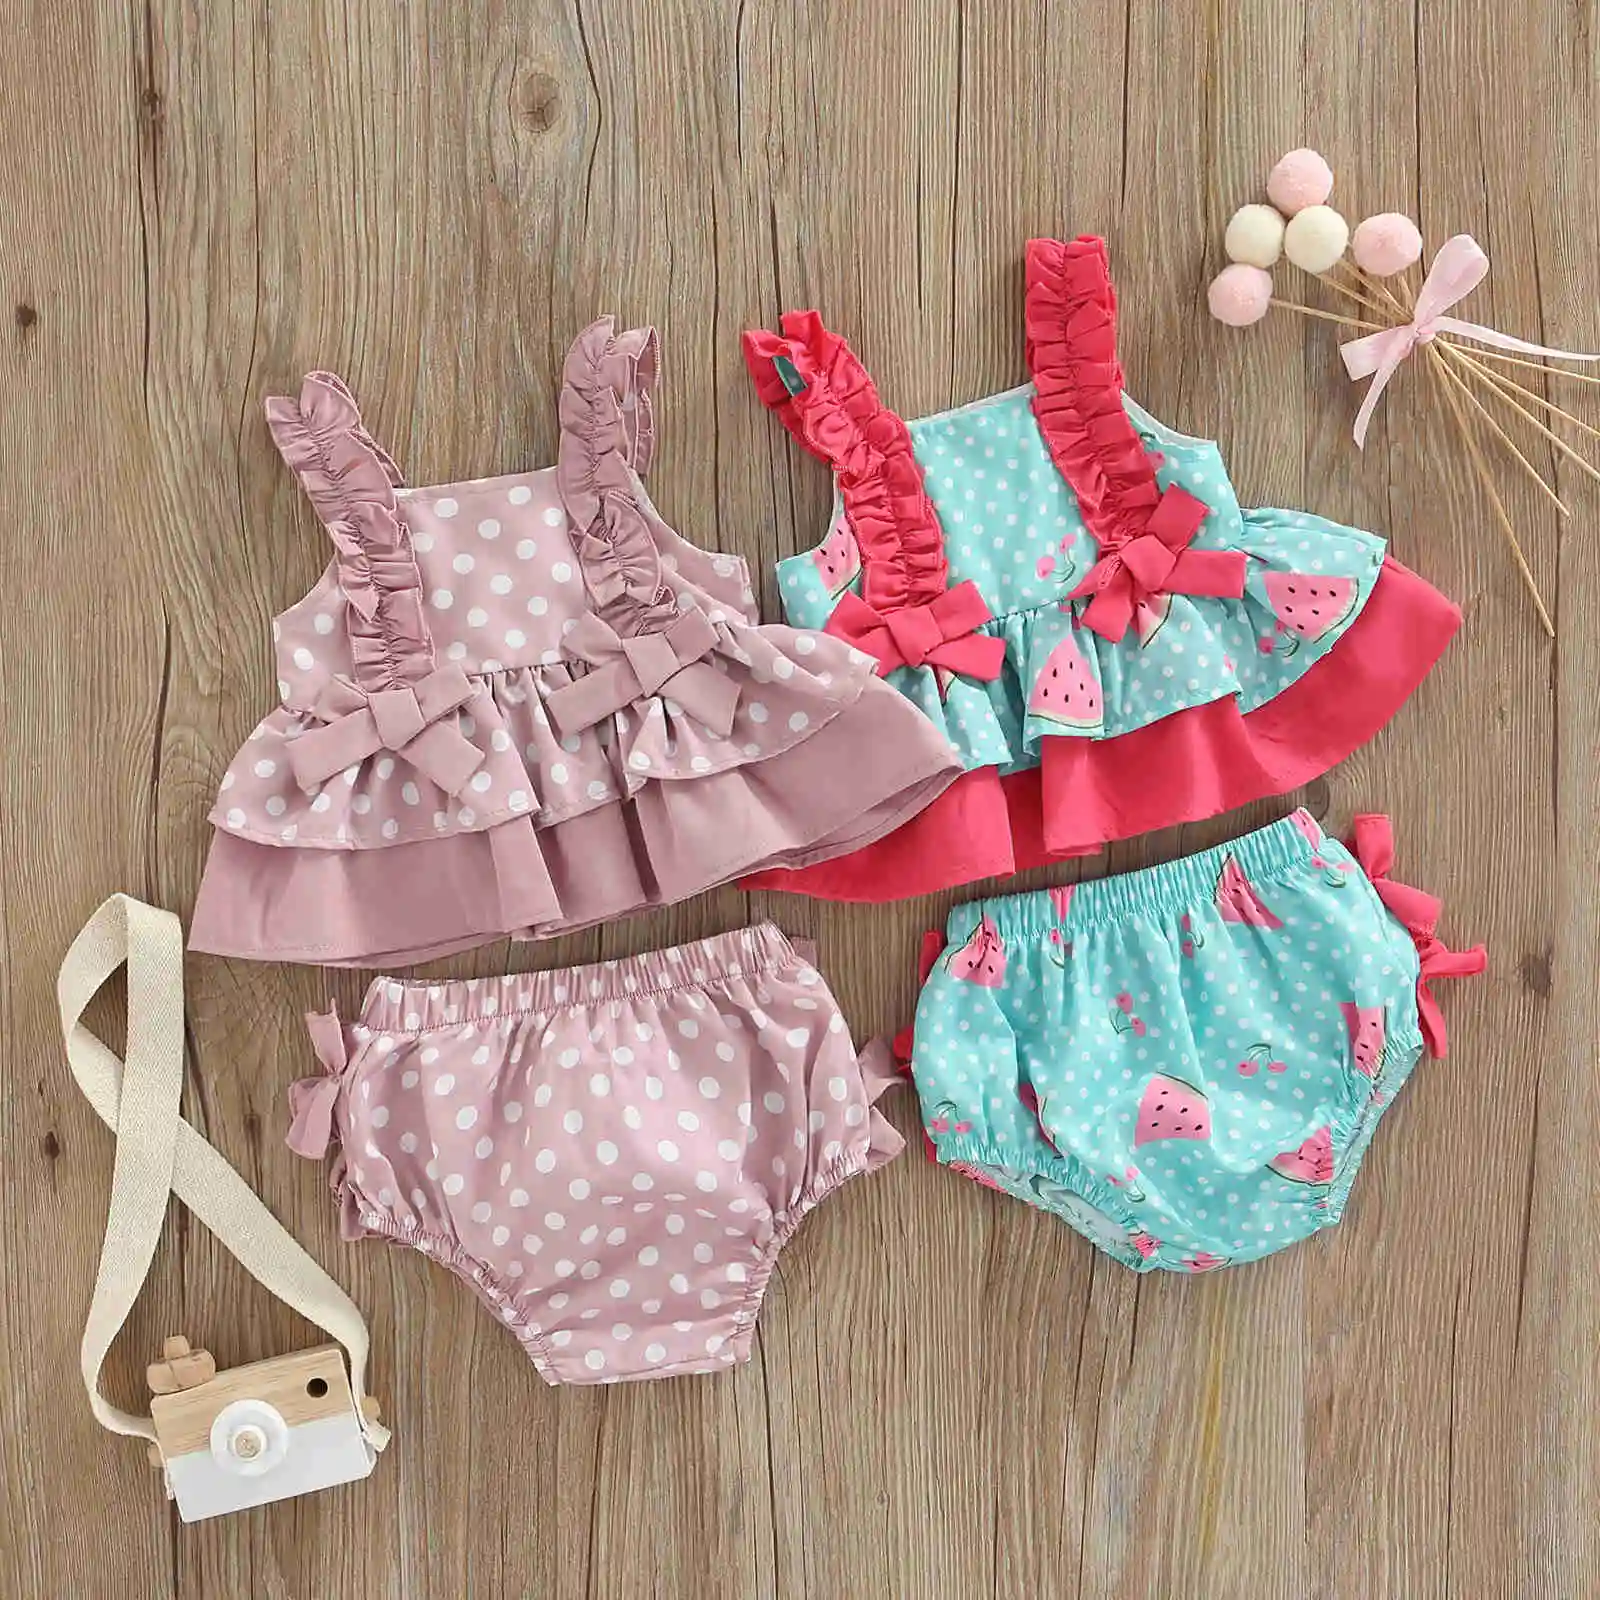 

Princess Infant Baby Girl Outfit Cute Bowknot Adorable Dots/Watermelon Pattern Sleeveless Tops+Lace Shorts Kids Clothes Set